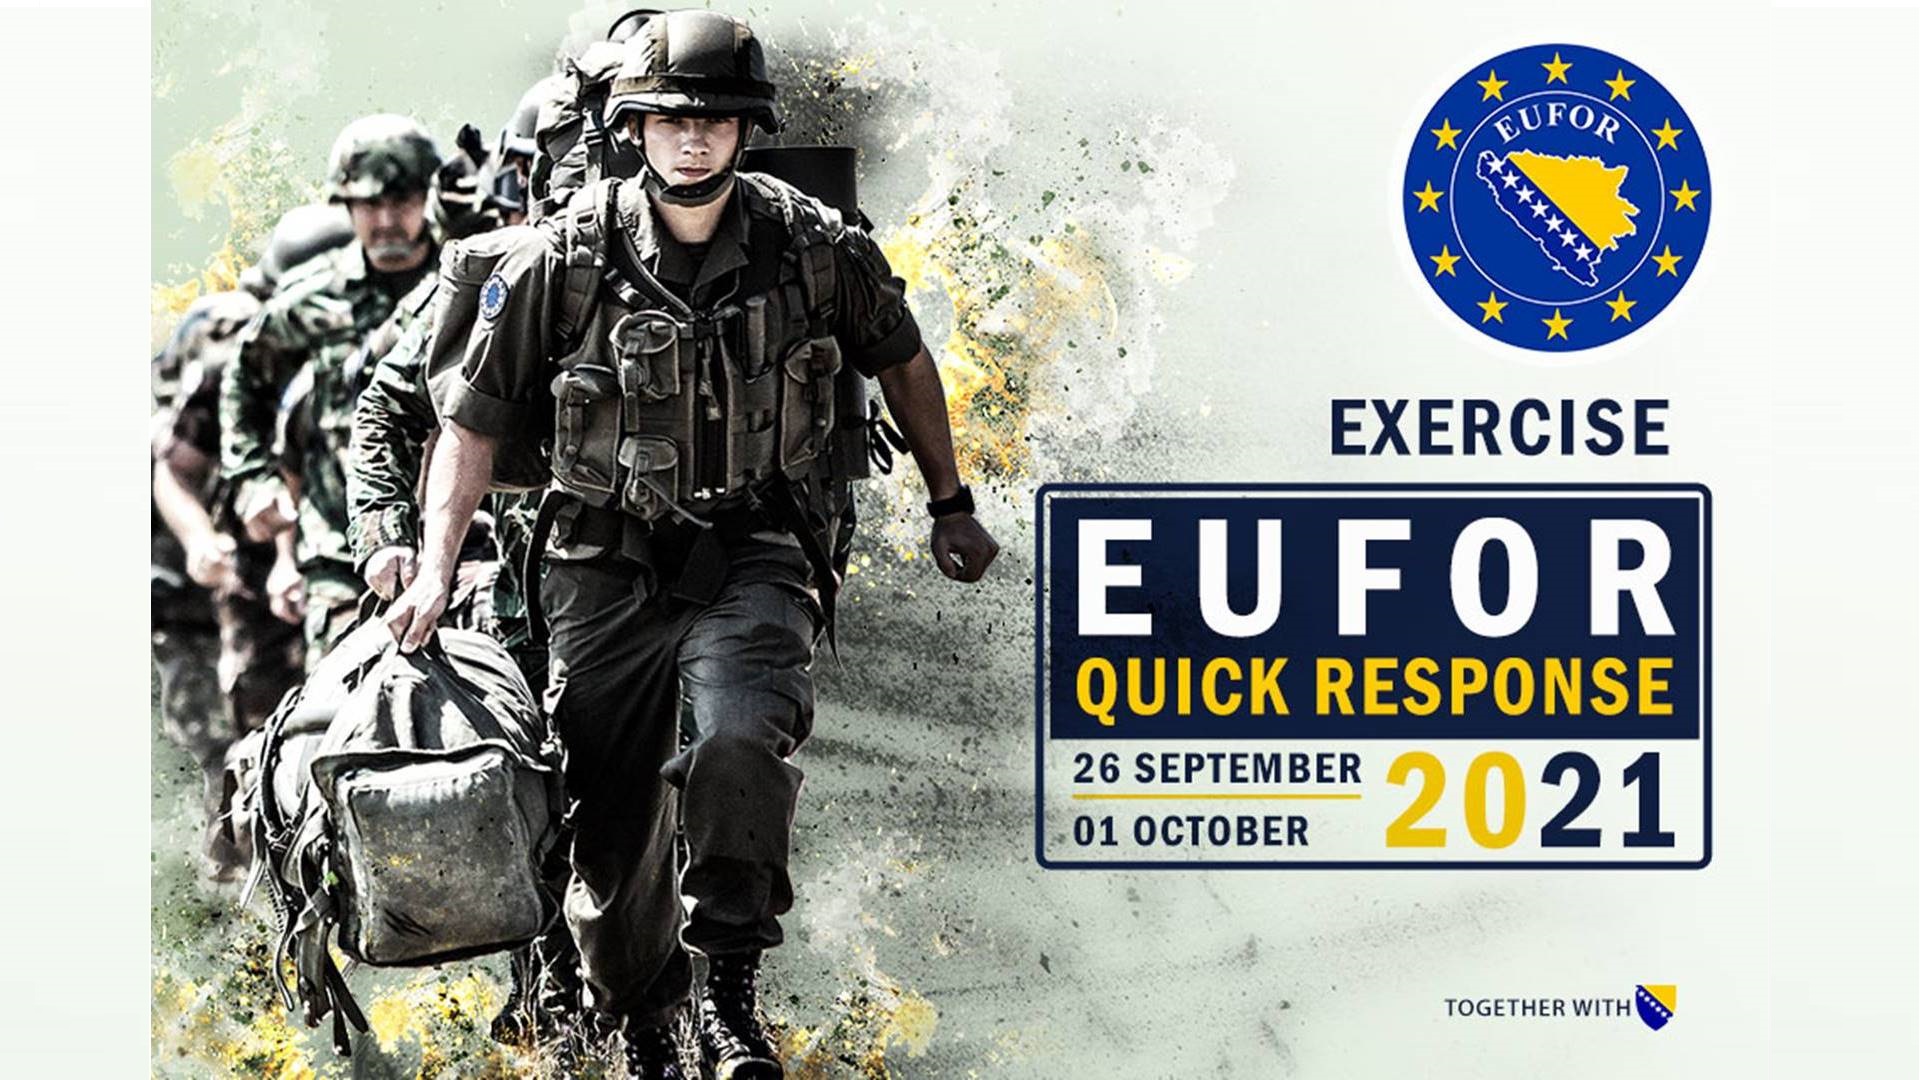 Bosnia and Herzegovina: The largest exercise that EUFOR has conducted to date